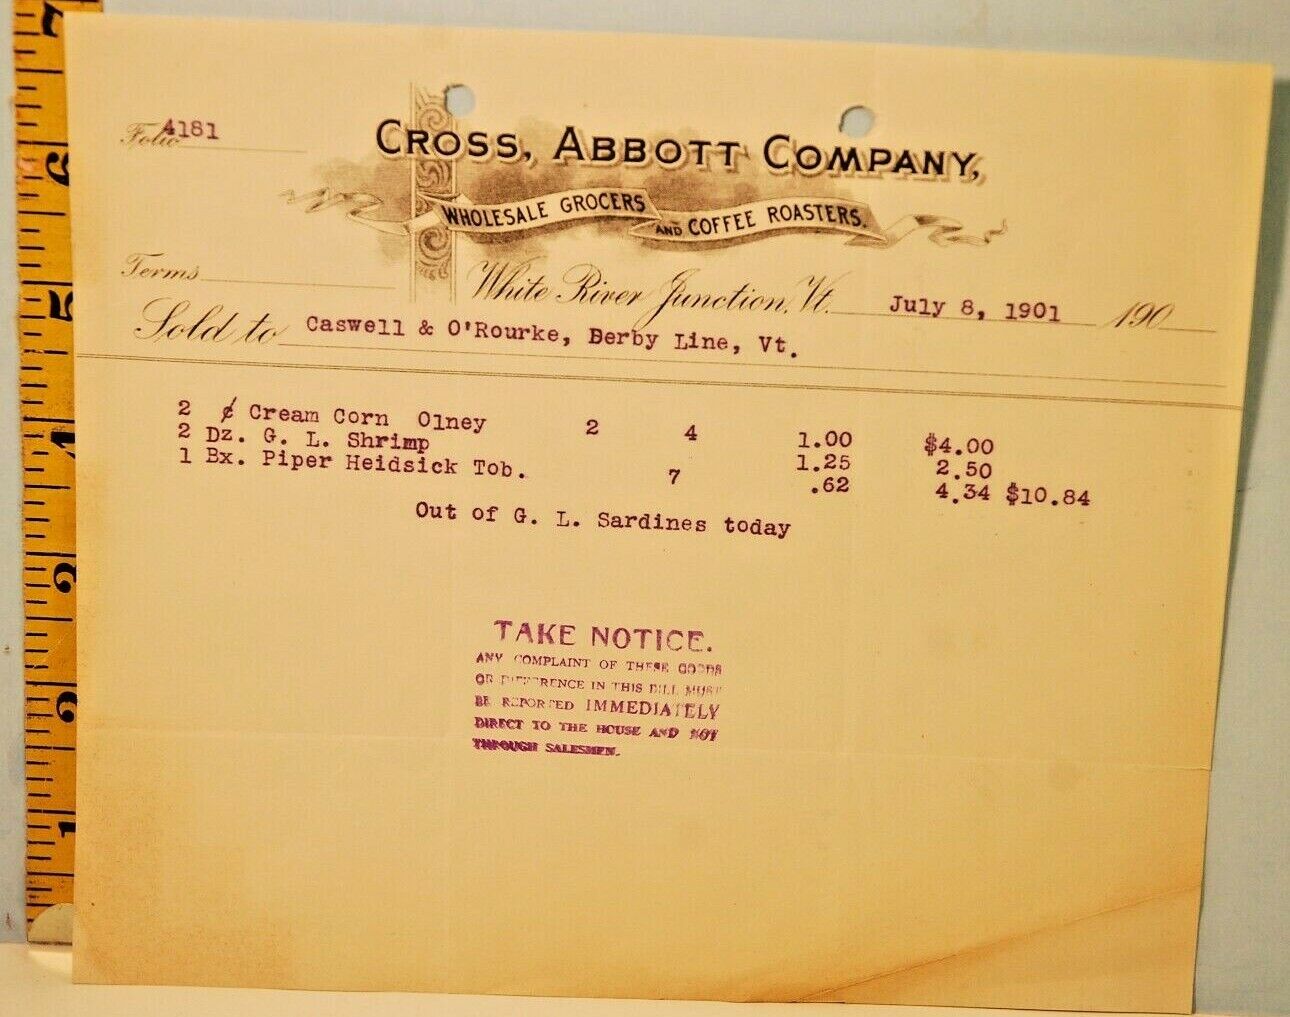 July 1, 1901 Cross Abbott Company Wholesale Grocers & Coffee Co. White River VT